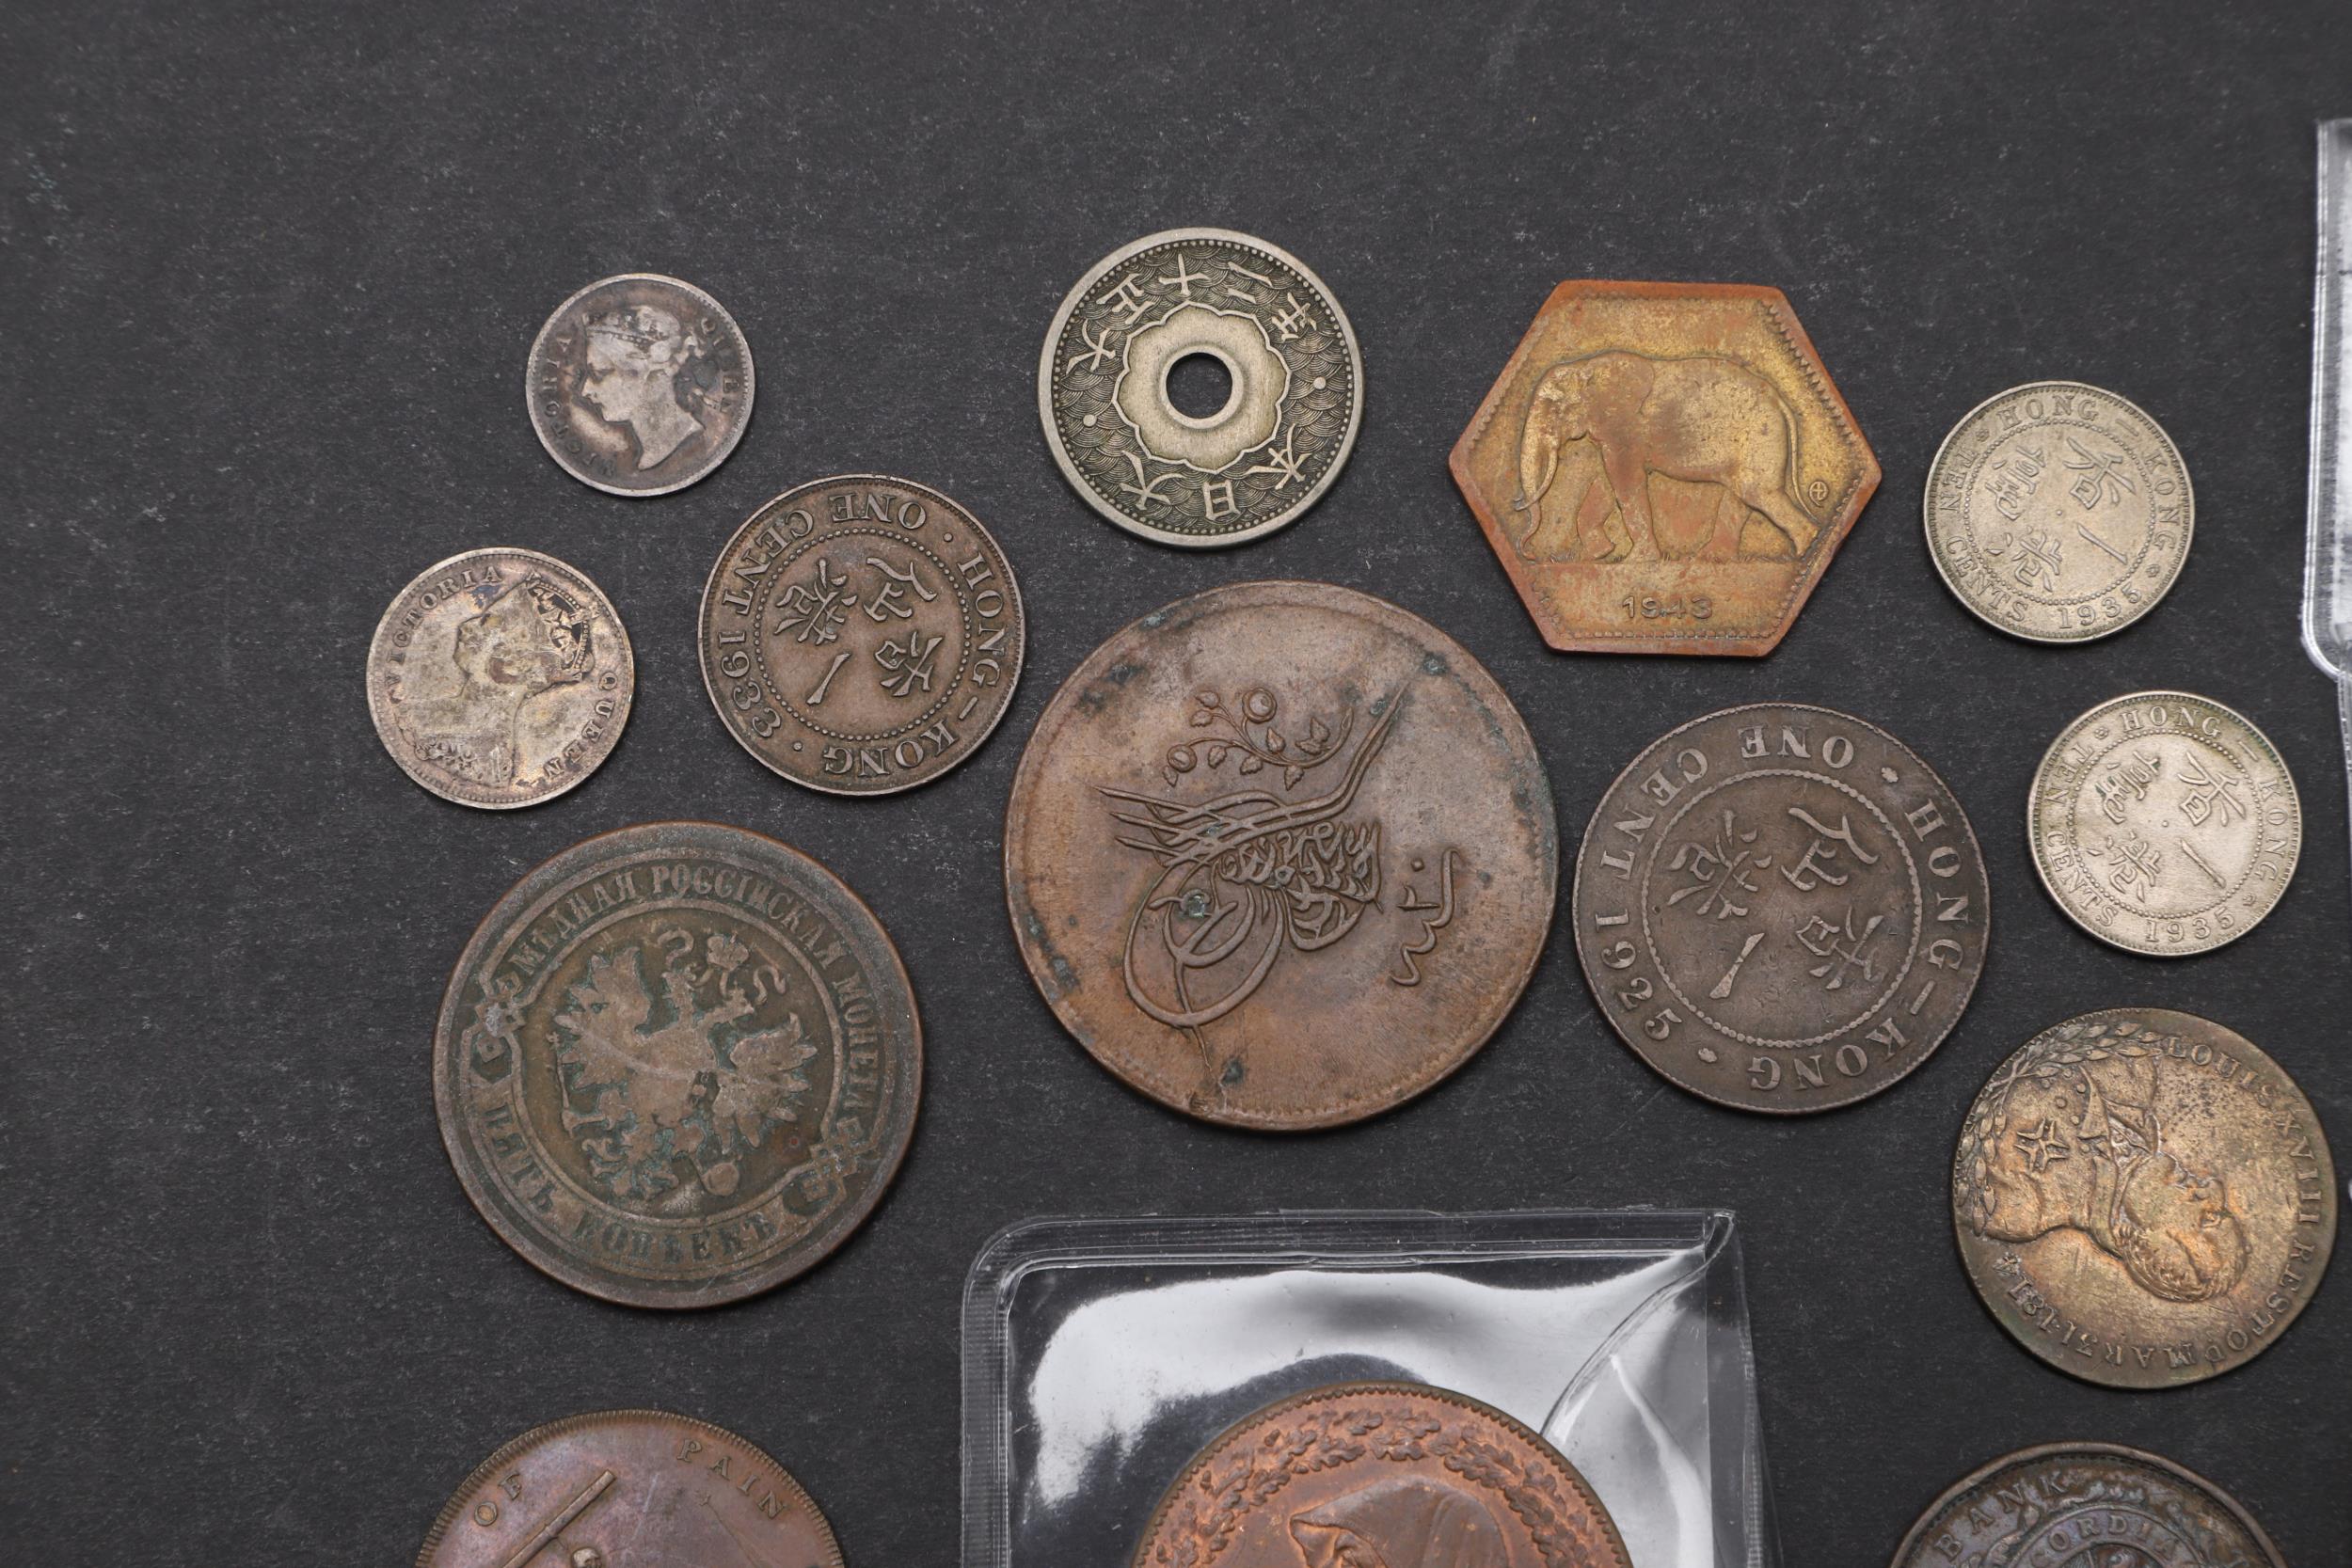 A SMALL COLLECTION OF RUSSIAN COINS. - Image 2 of 7